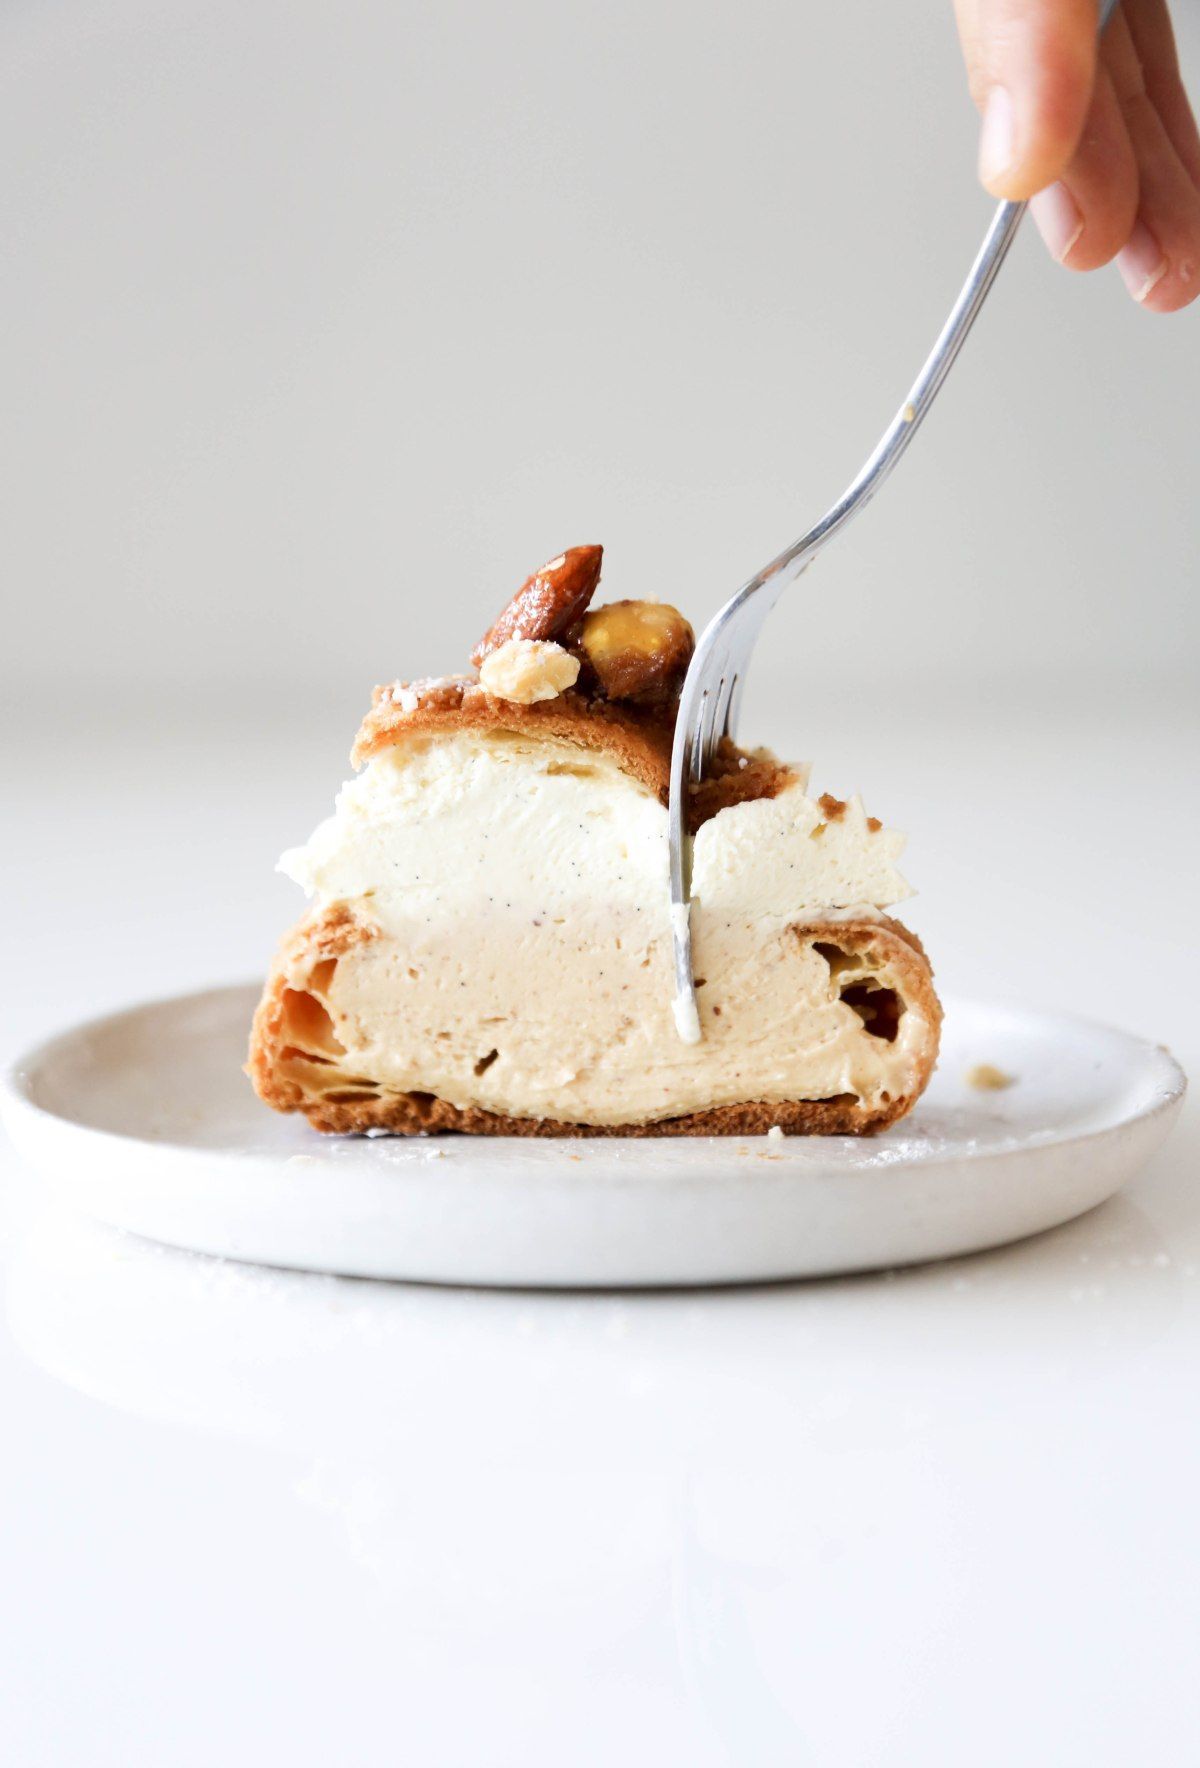 13 french desserts Photography ideas